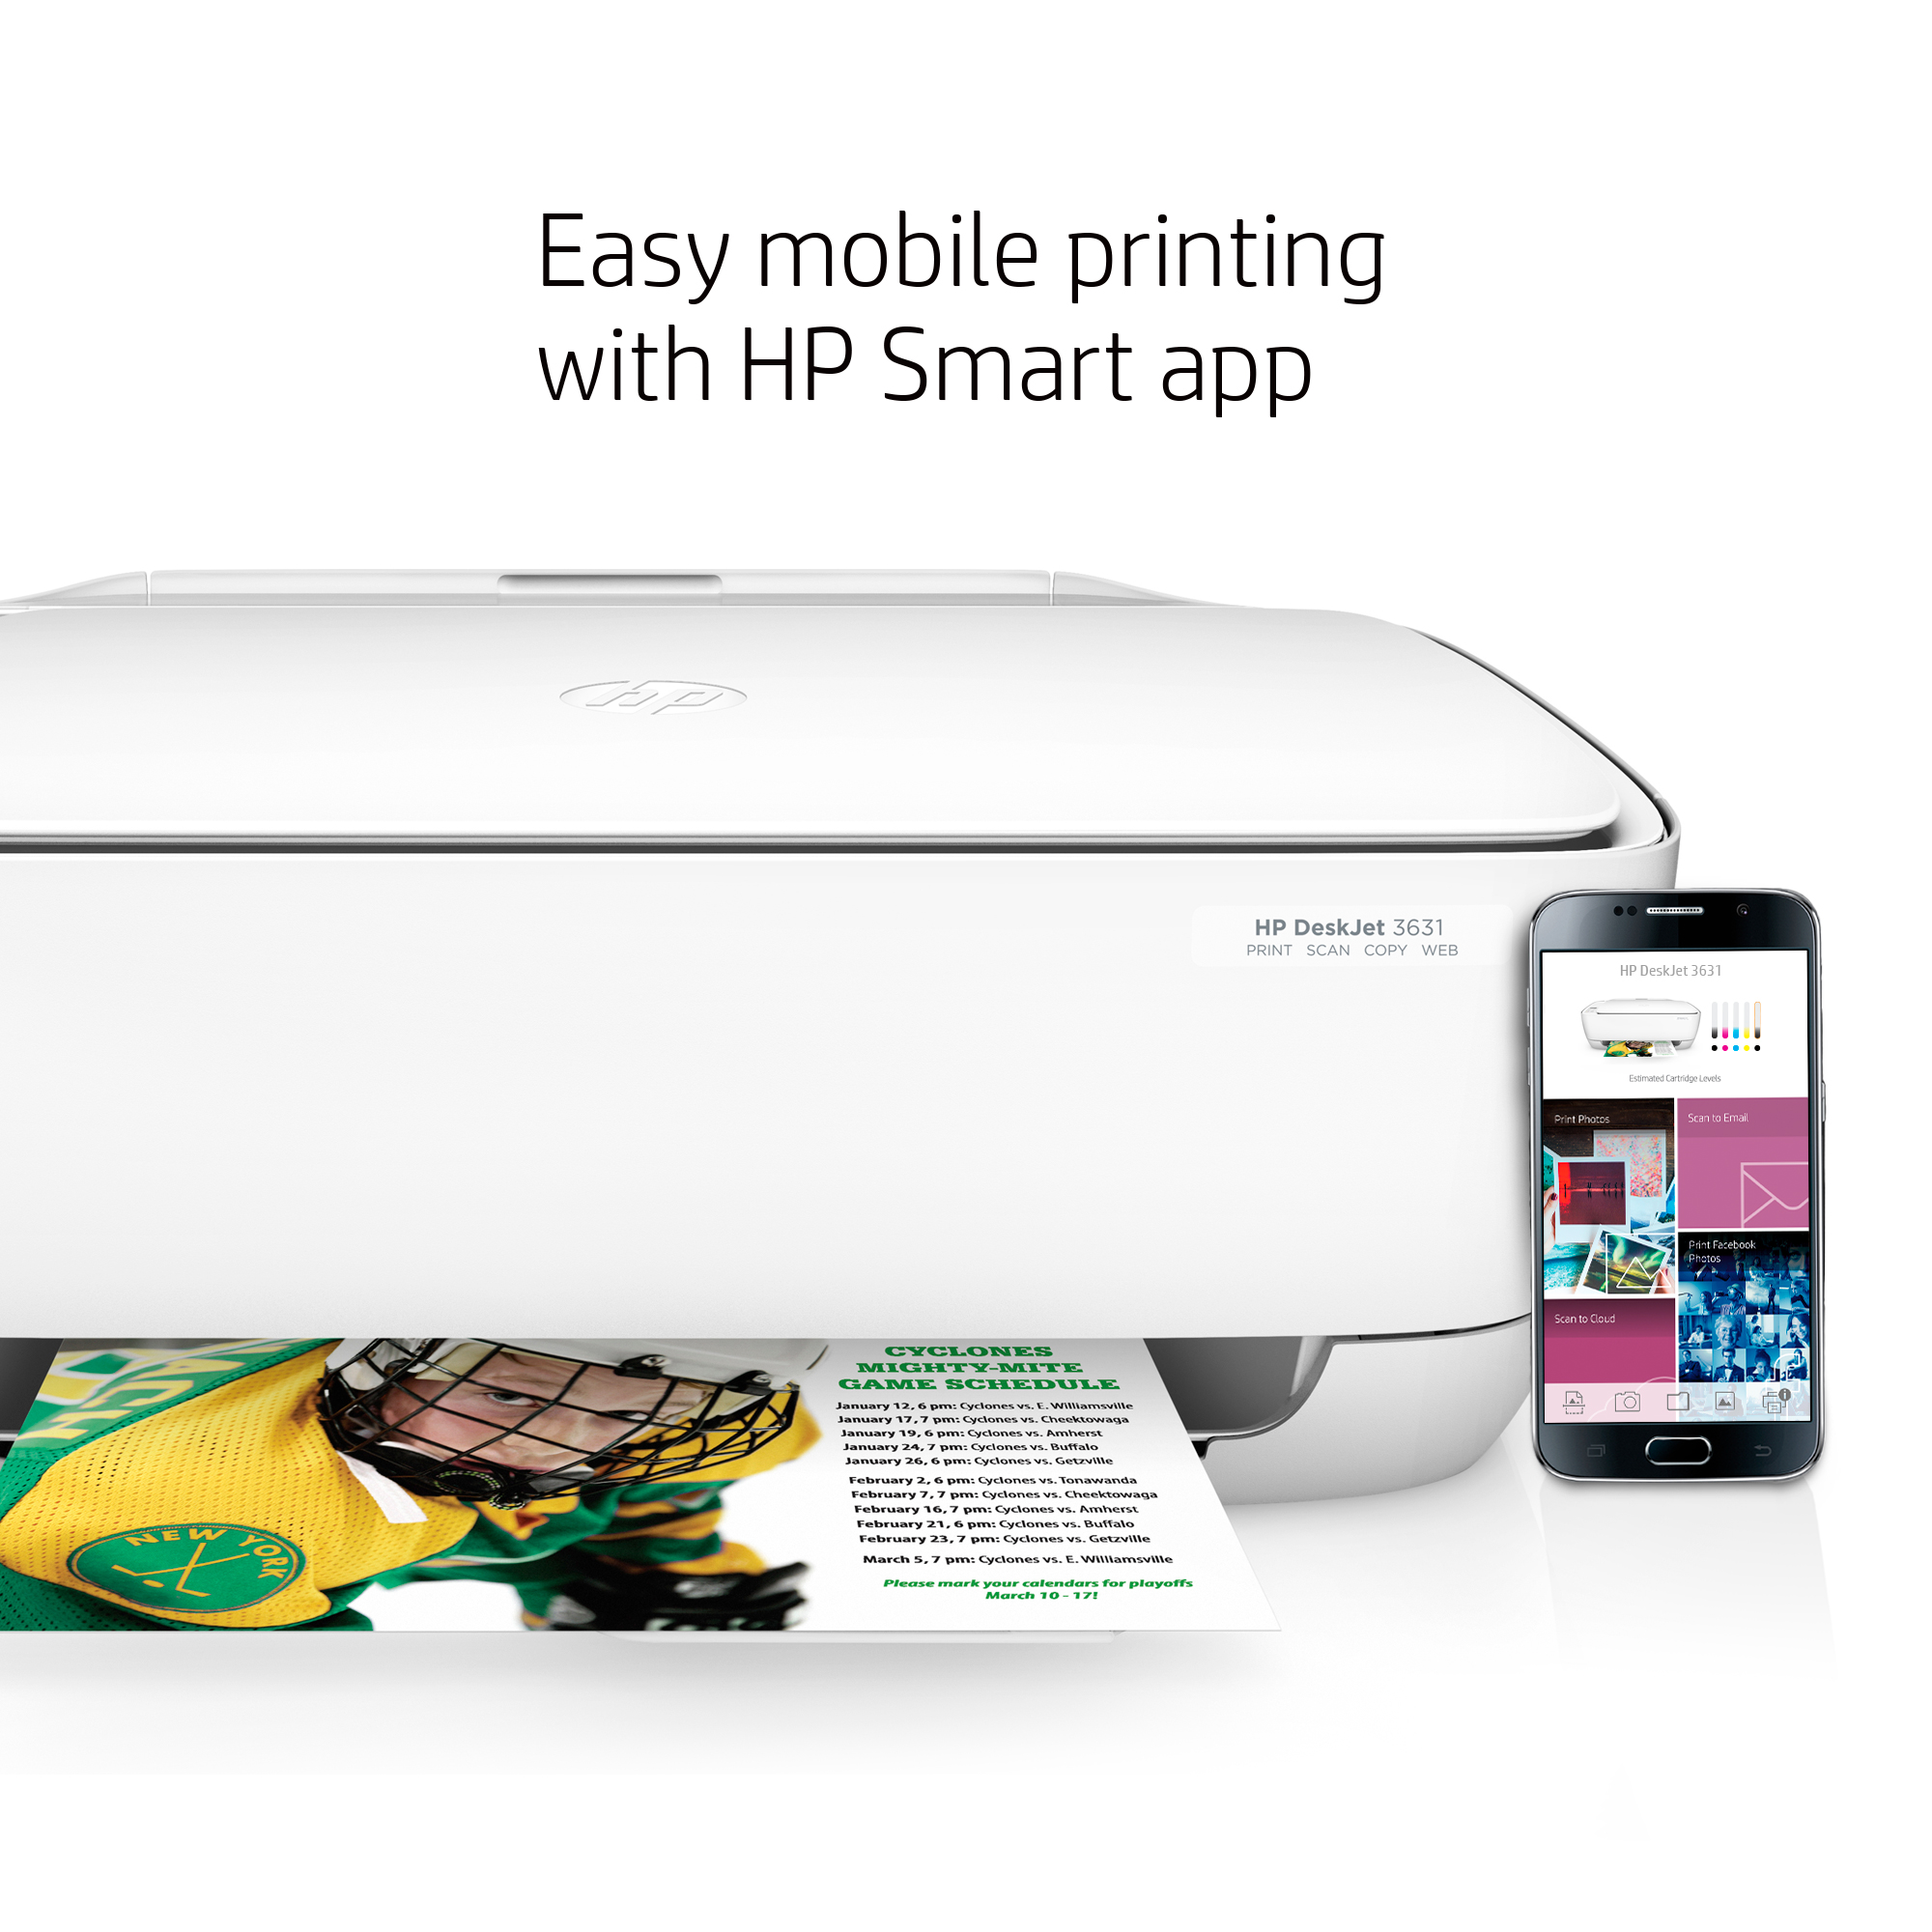 HP DeskJet 3631 All-in-One Compact Printer with Wireless Printing (K4T94A) - image 5 of 13